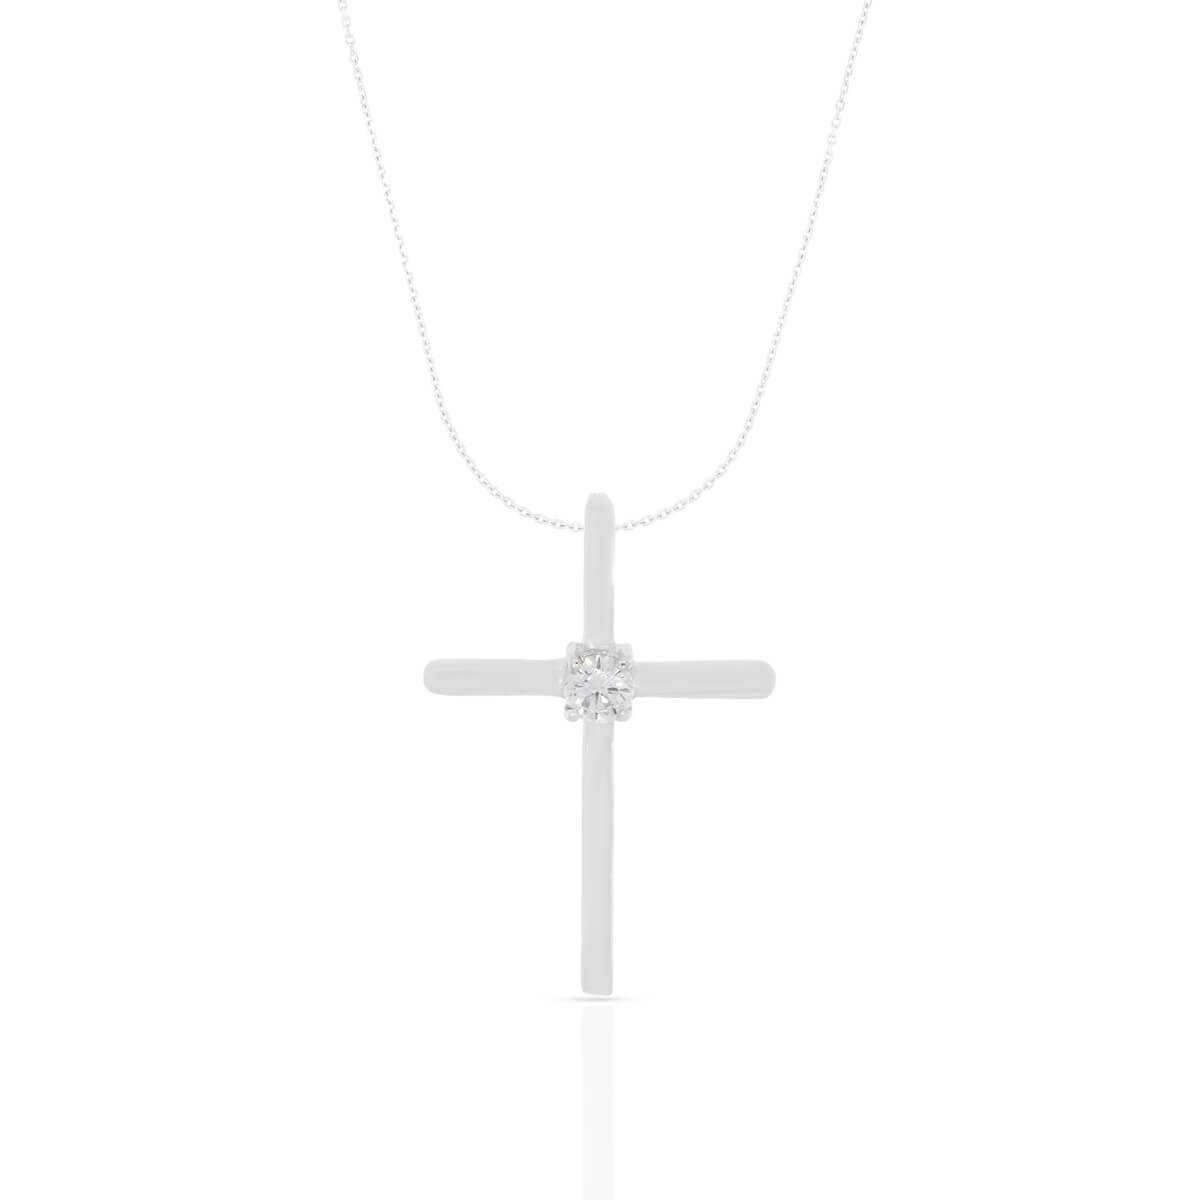 925 Sterling Silver Elegance Cross Pendant with Link Chain